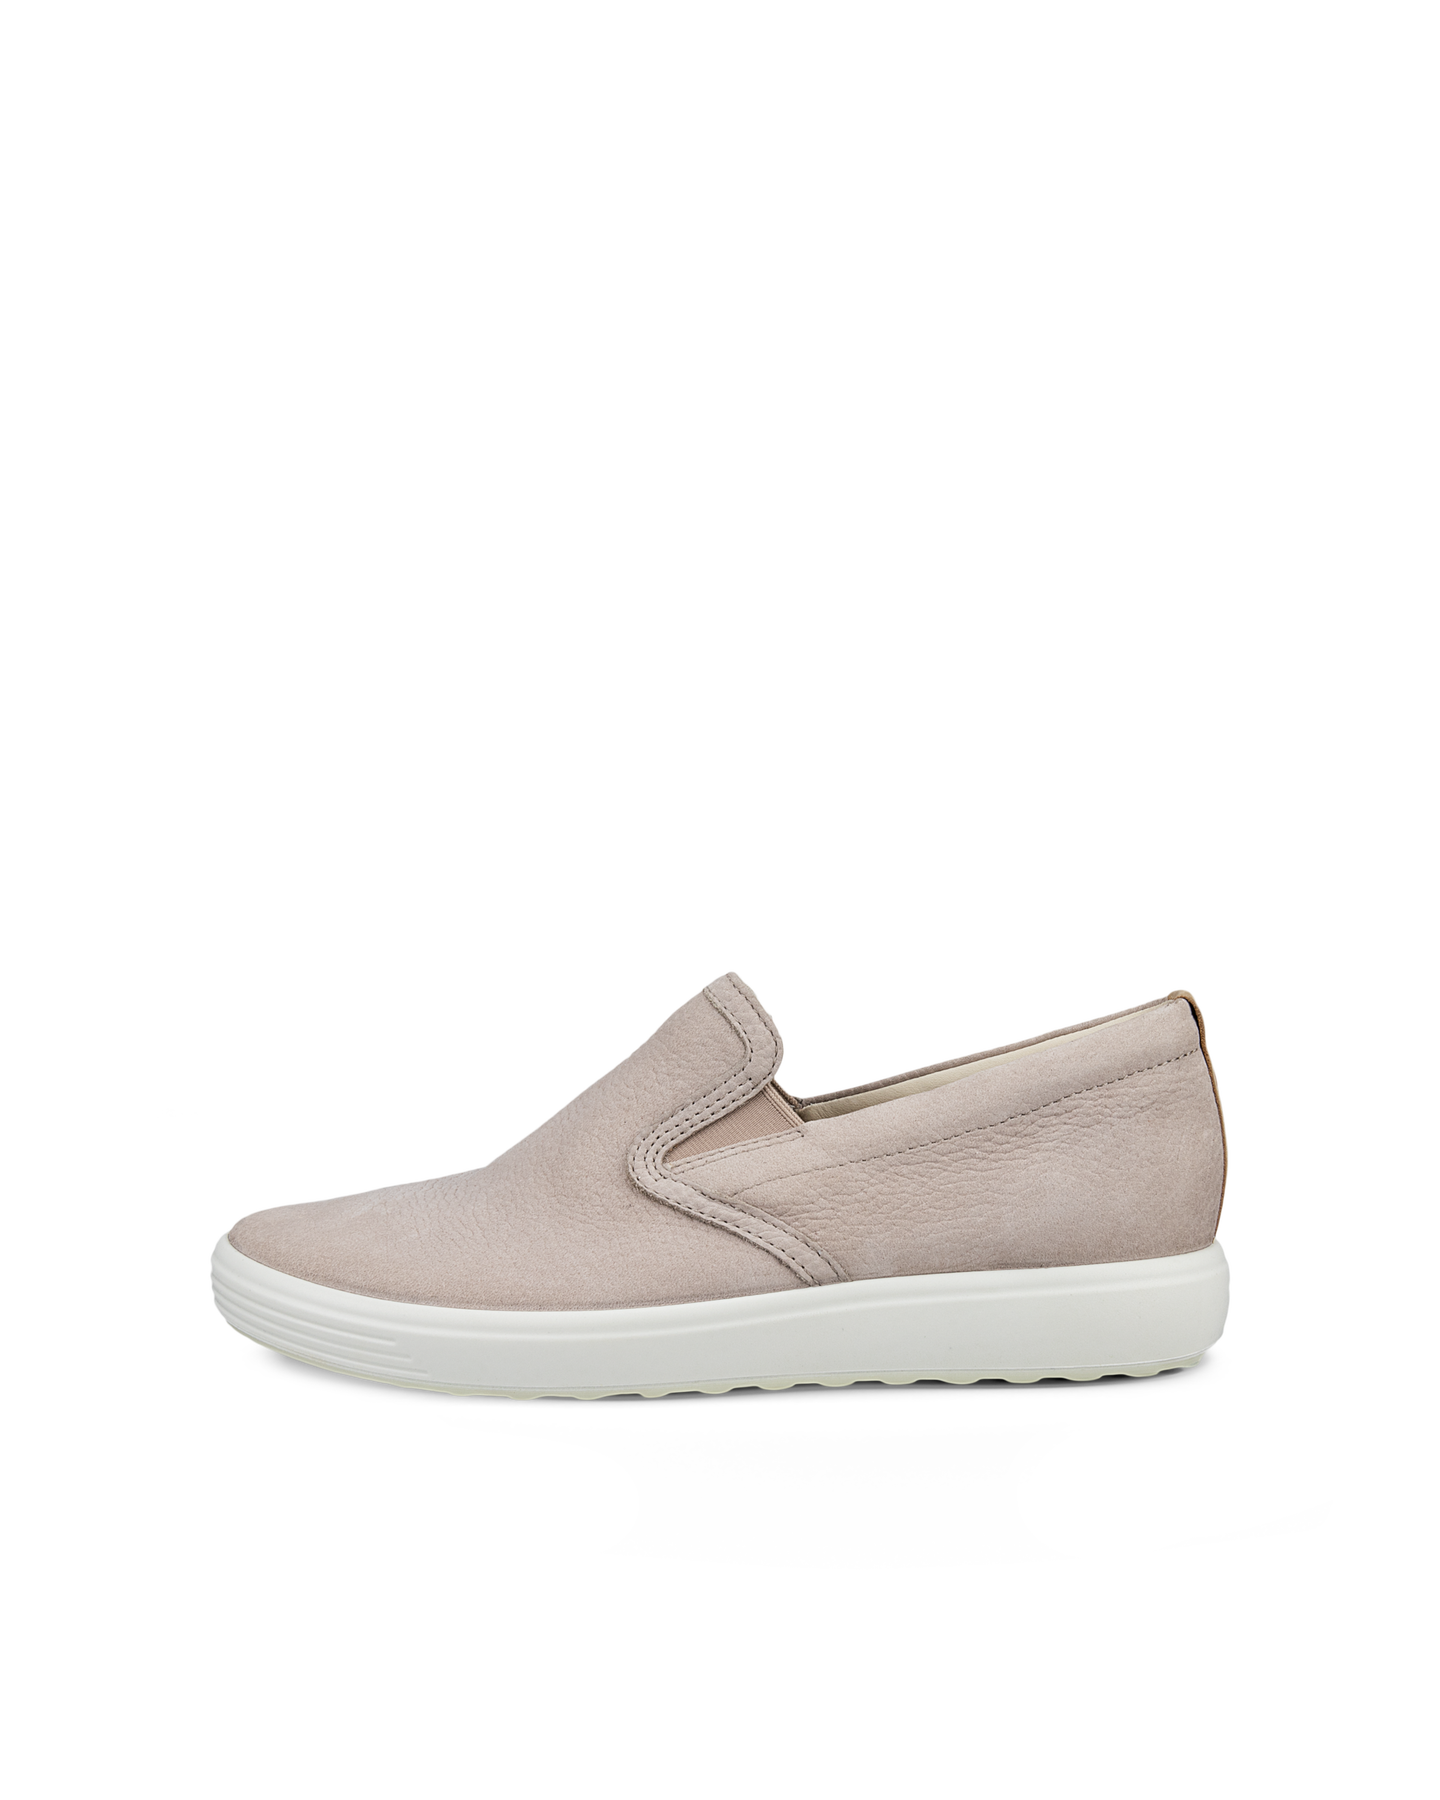 UPC 194891089364 product image for ECCO Women's Soft 7 Casual Slip-on Size 7 Leather Grey Rose | upcitemdb.com